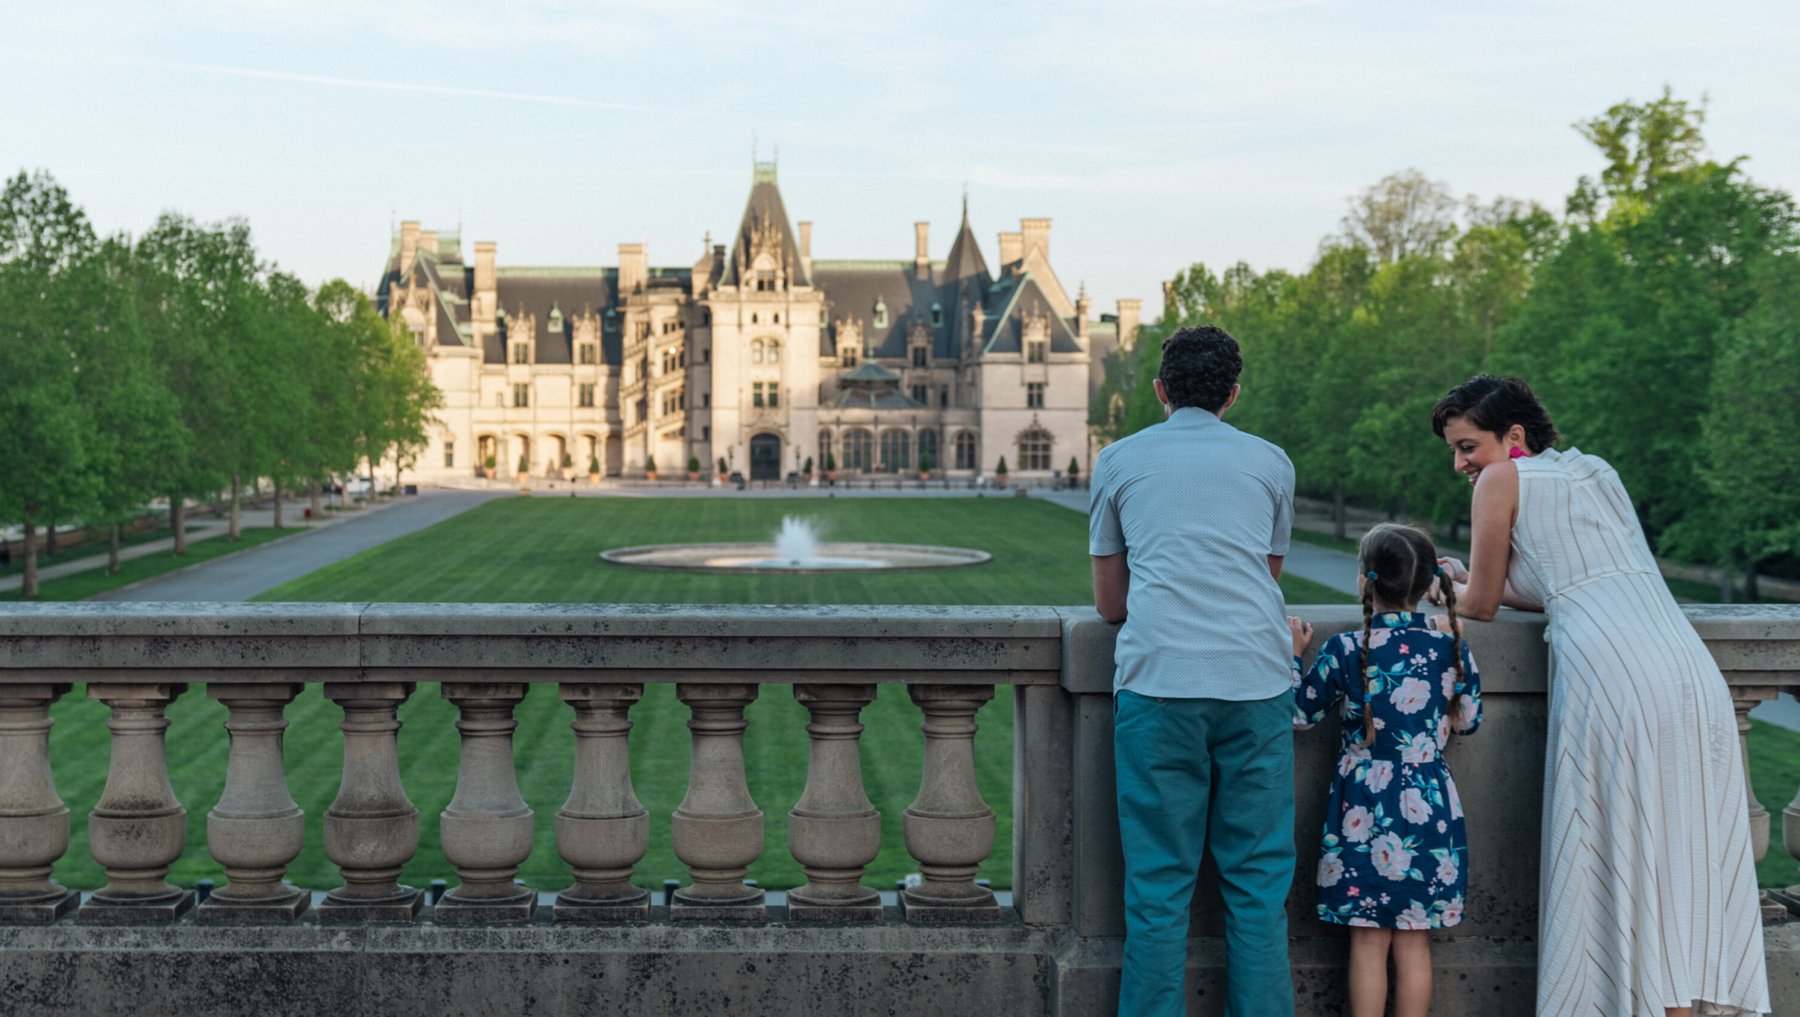 Parents and child with backs to us standing on ornate walkway overlooking Biltmore house and grounds